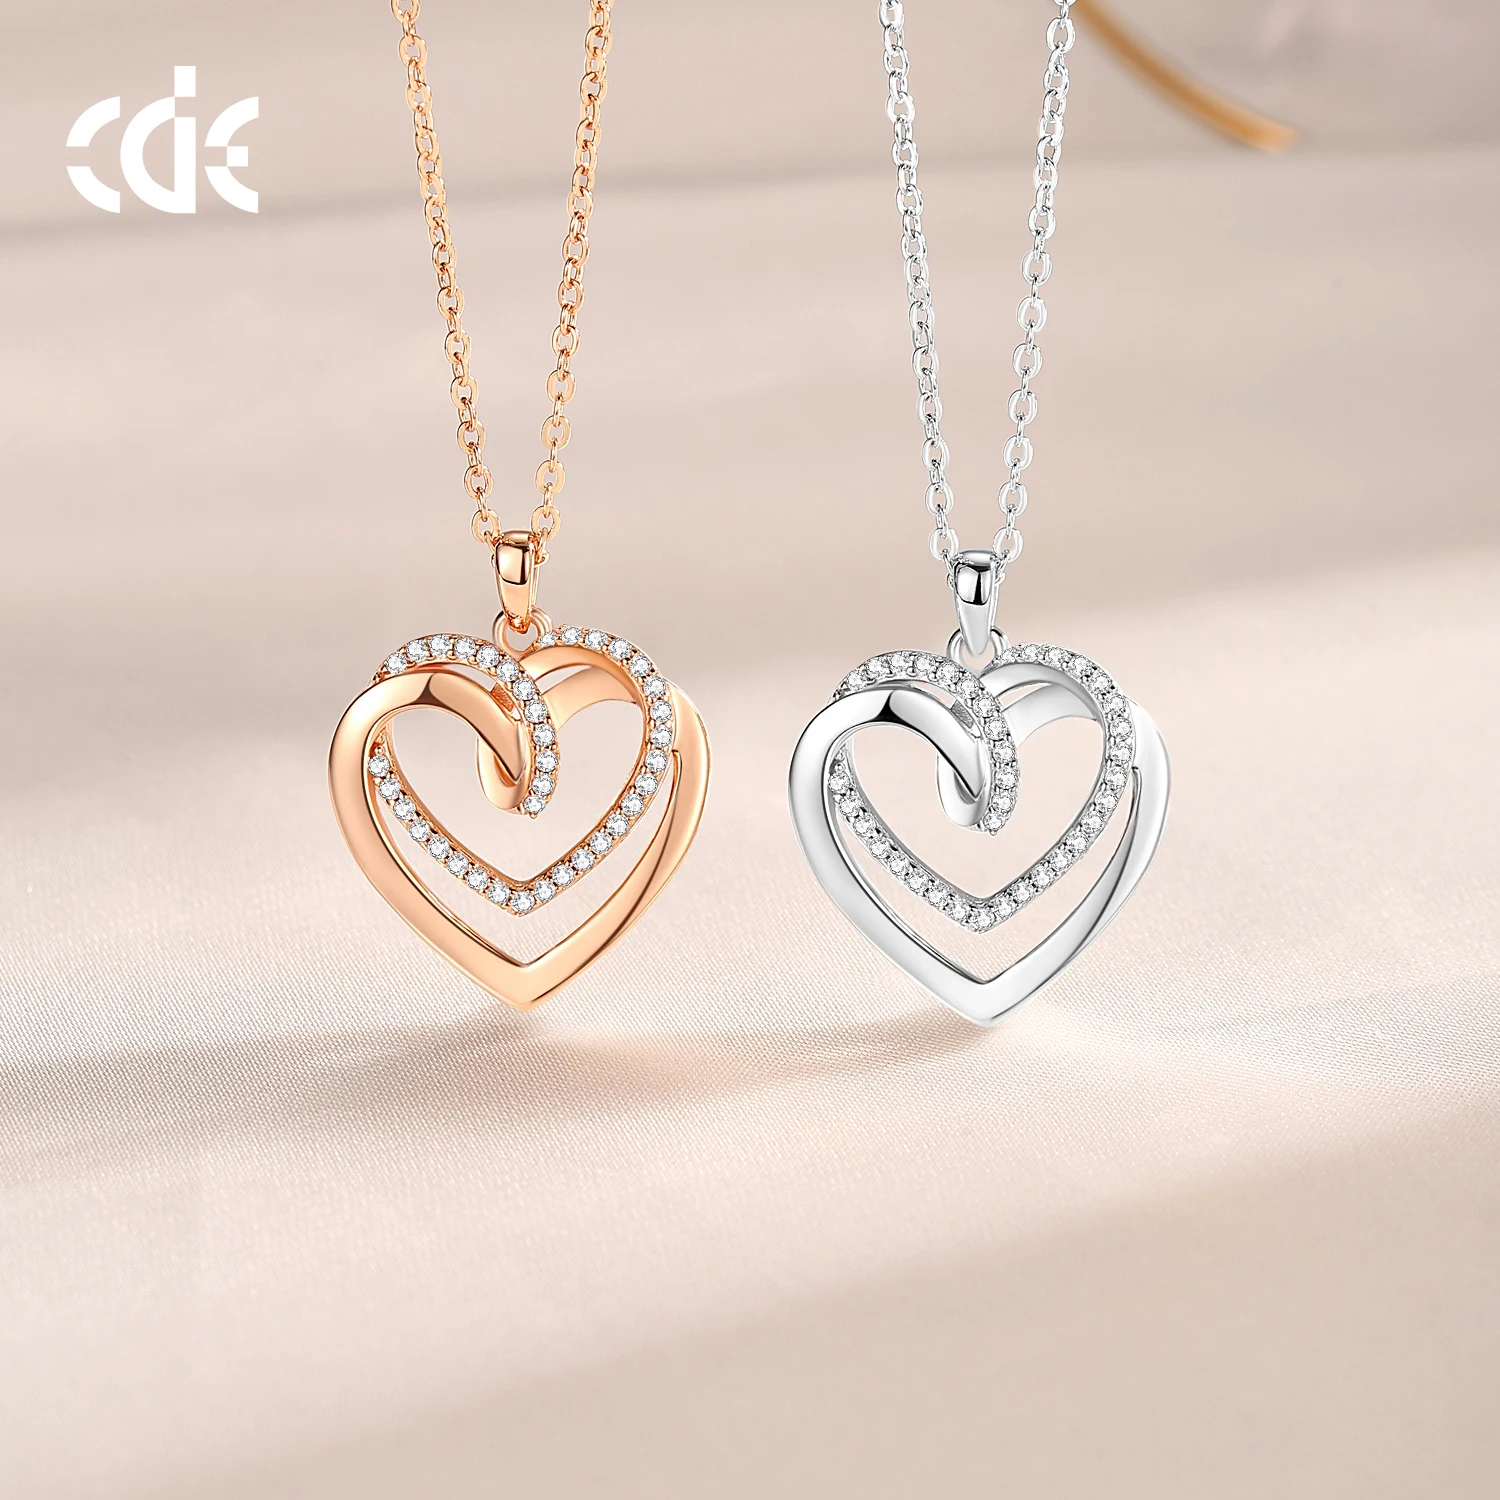 CDE YN1121 Silver 925 Jewelry 925 Sterling Silver Heart Necklace For Women Rose Gold Plated Love Heart-Shaped Necklace